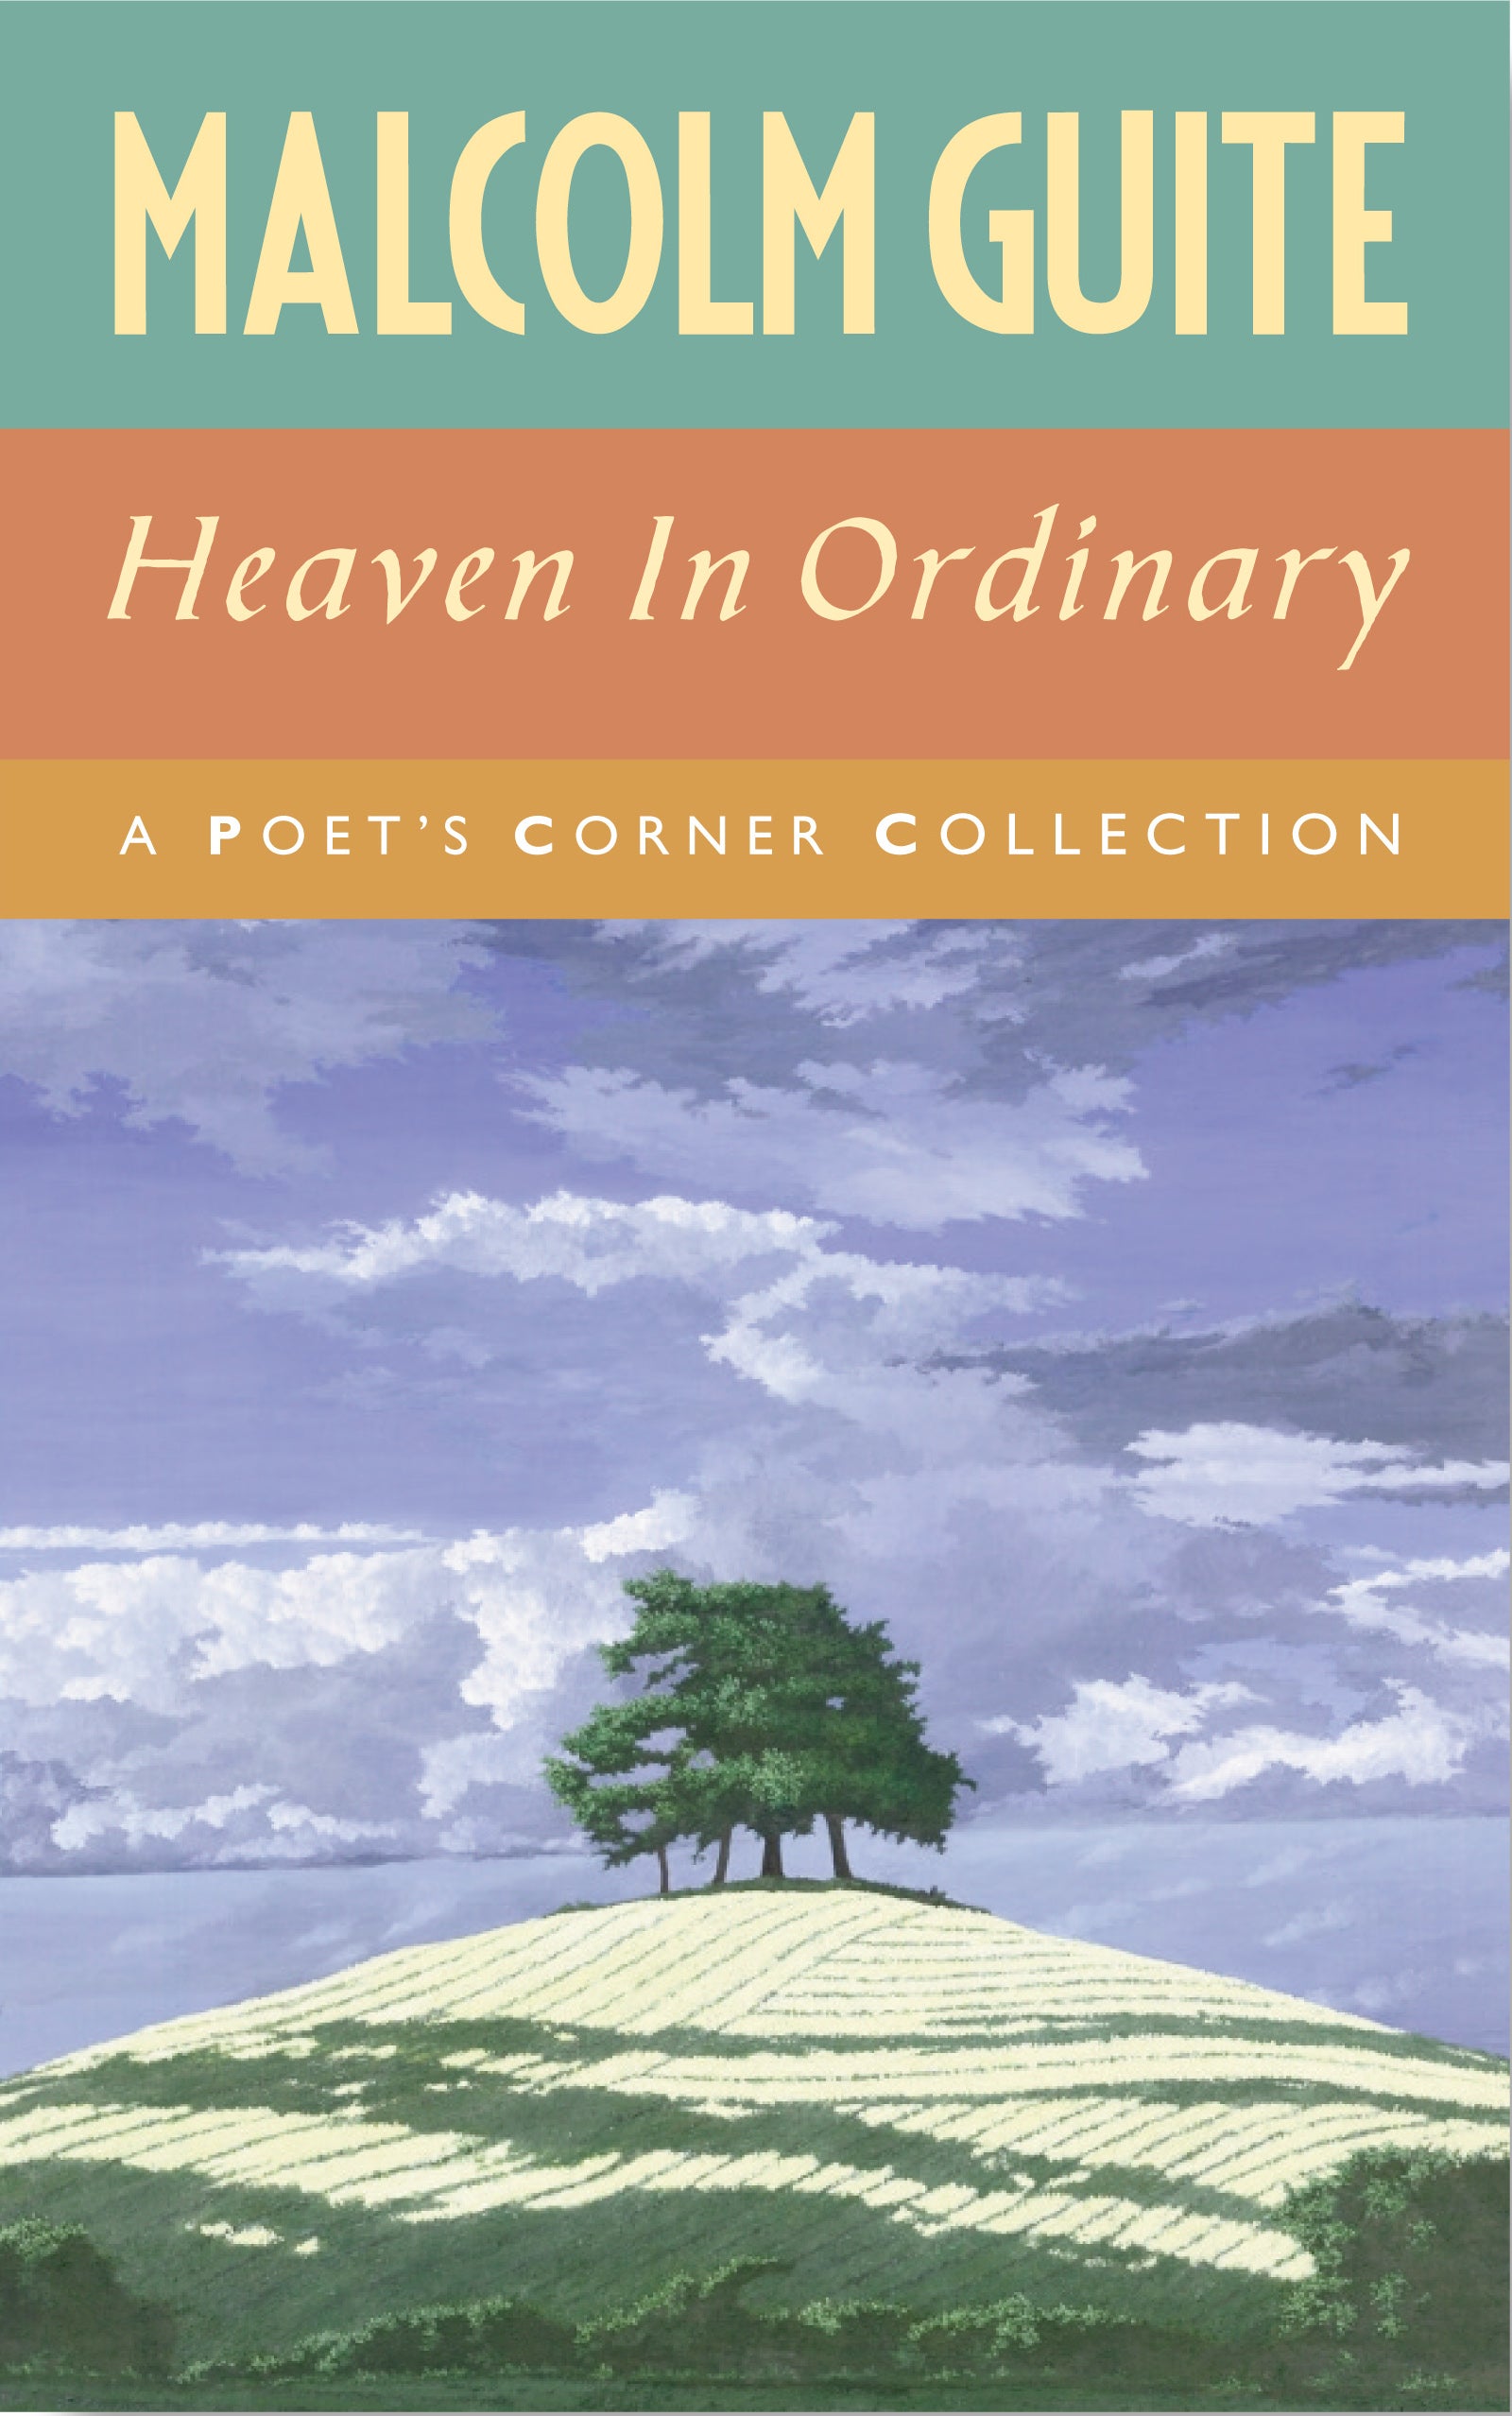 Image of Heaven in Ordinary other